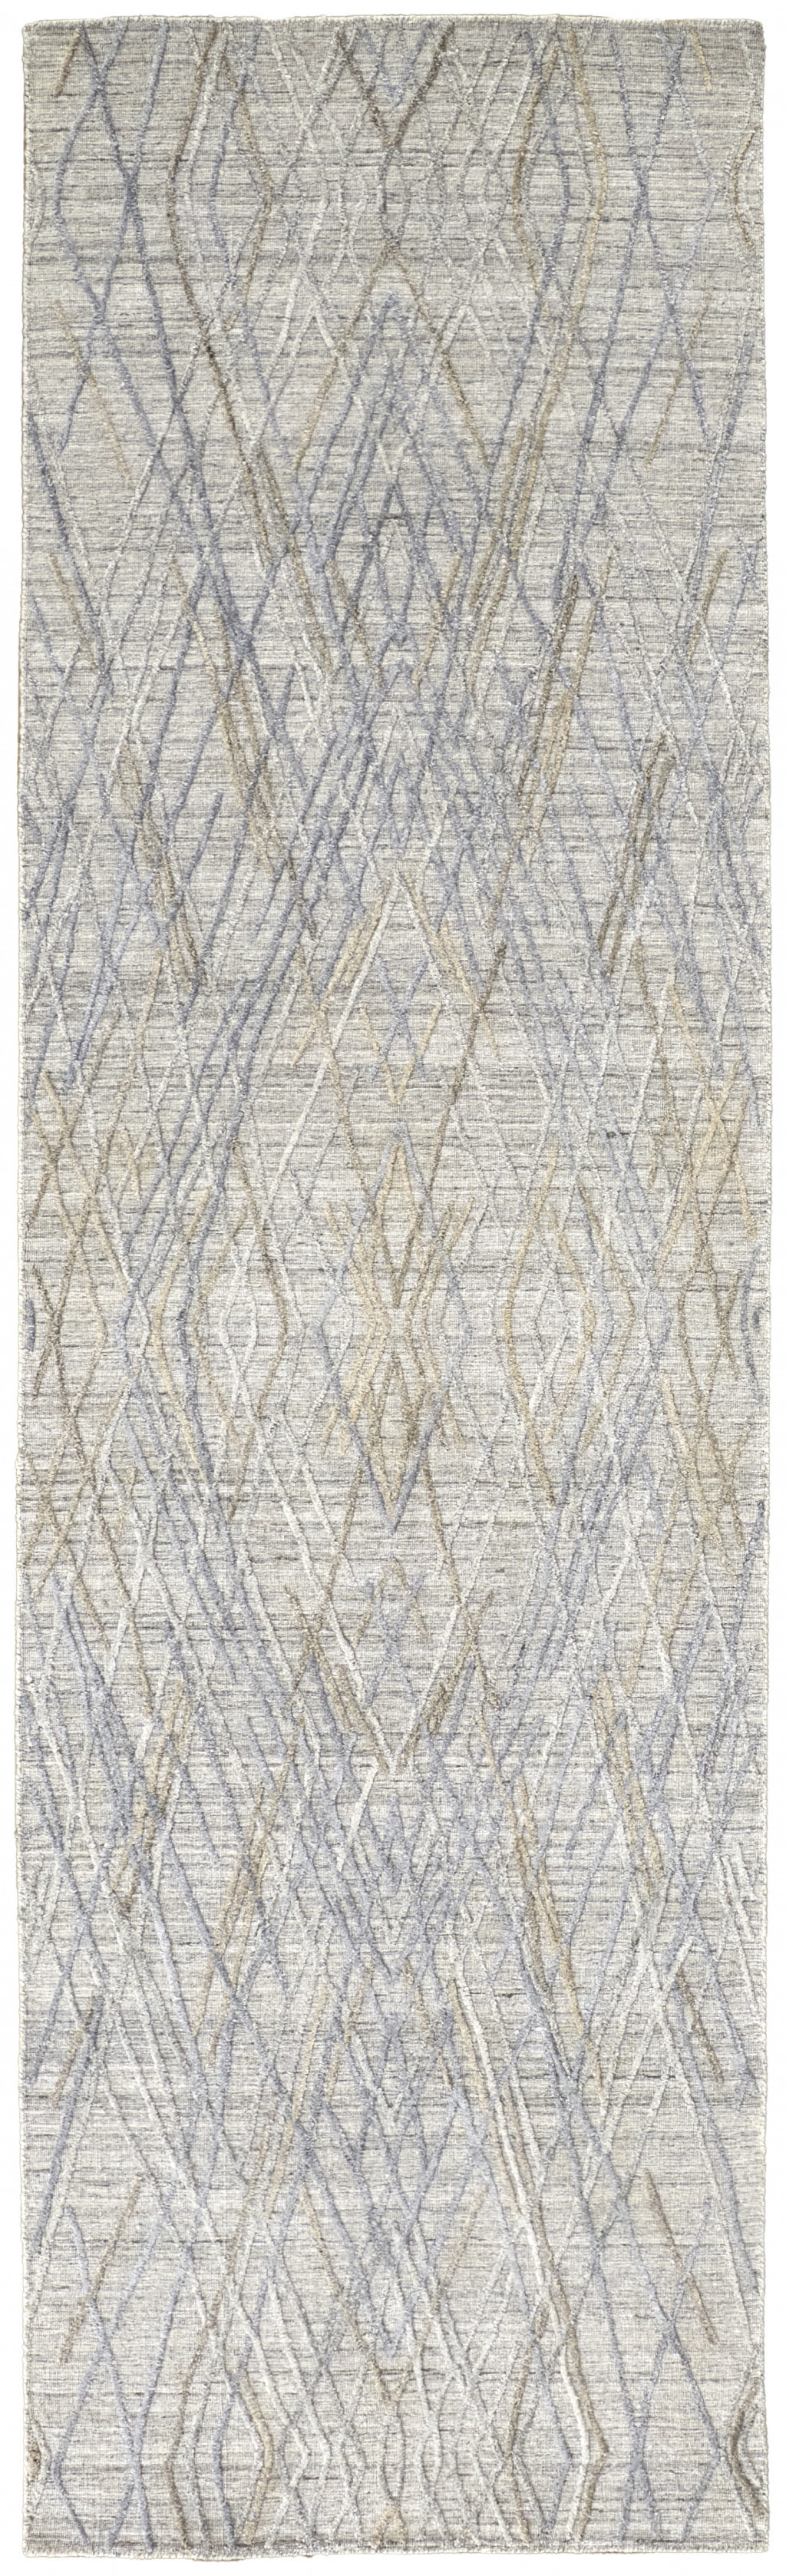 8' Gray And Blue Abstract Hand Woven Runner Rug-513550-1